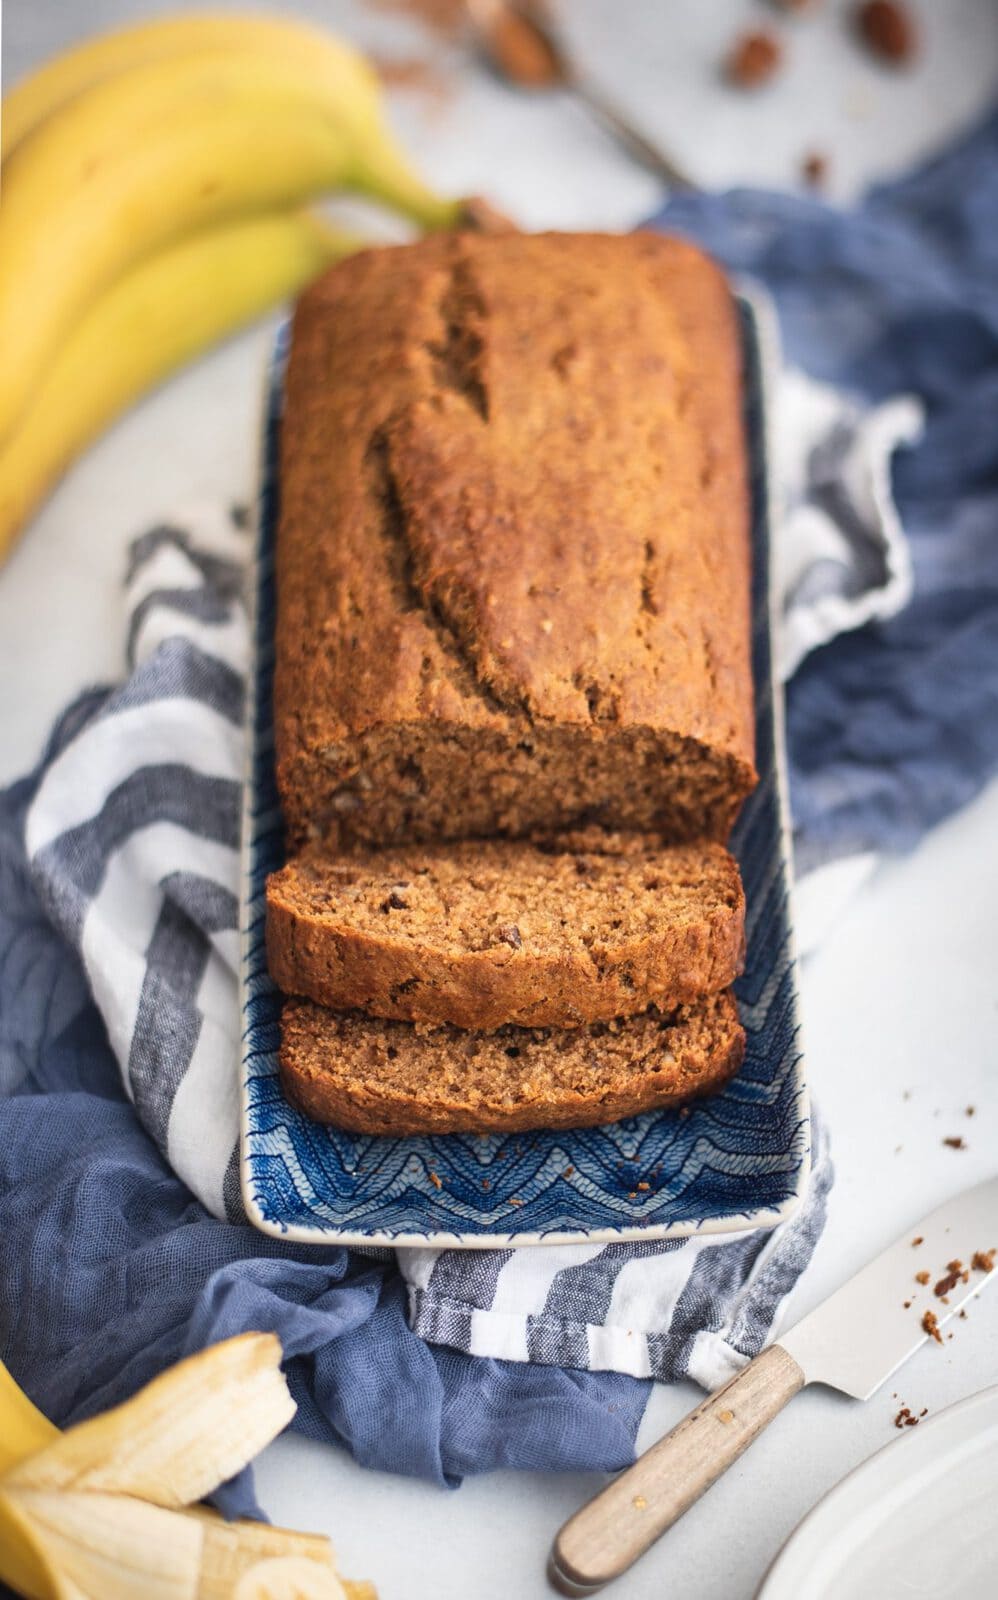 Blue plate with healthy banana bread loaf and slices